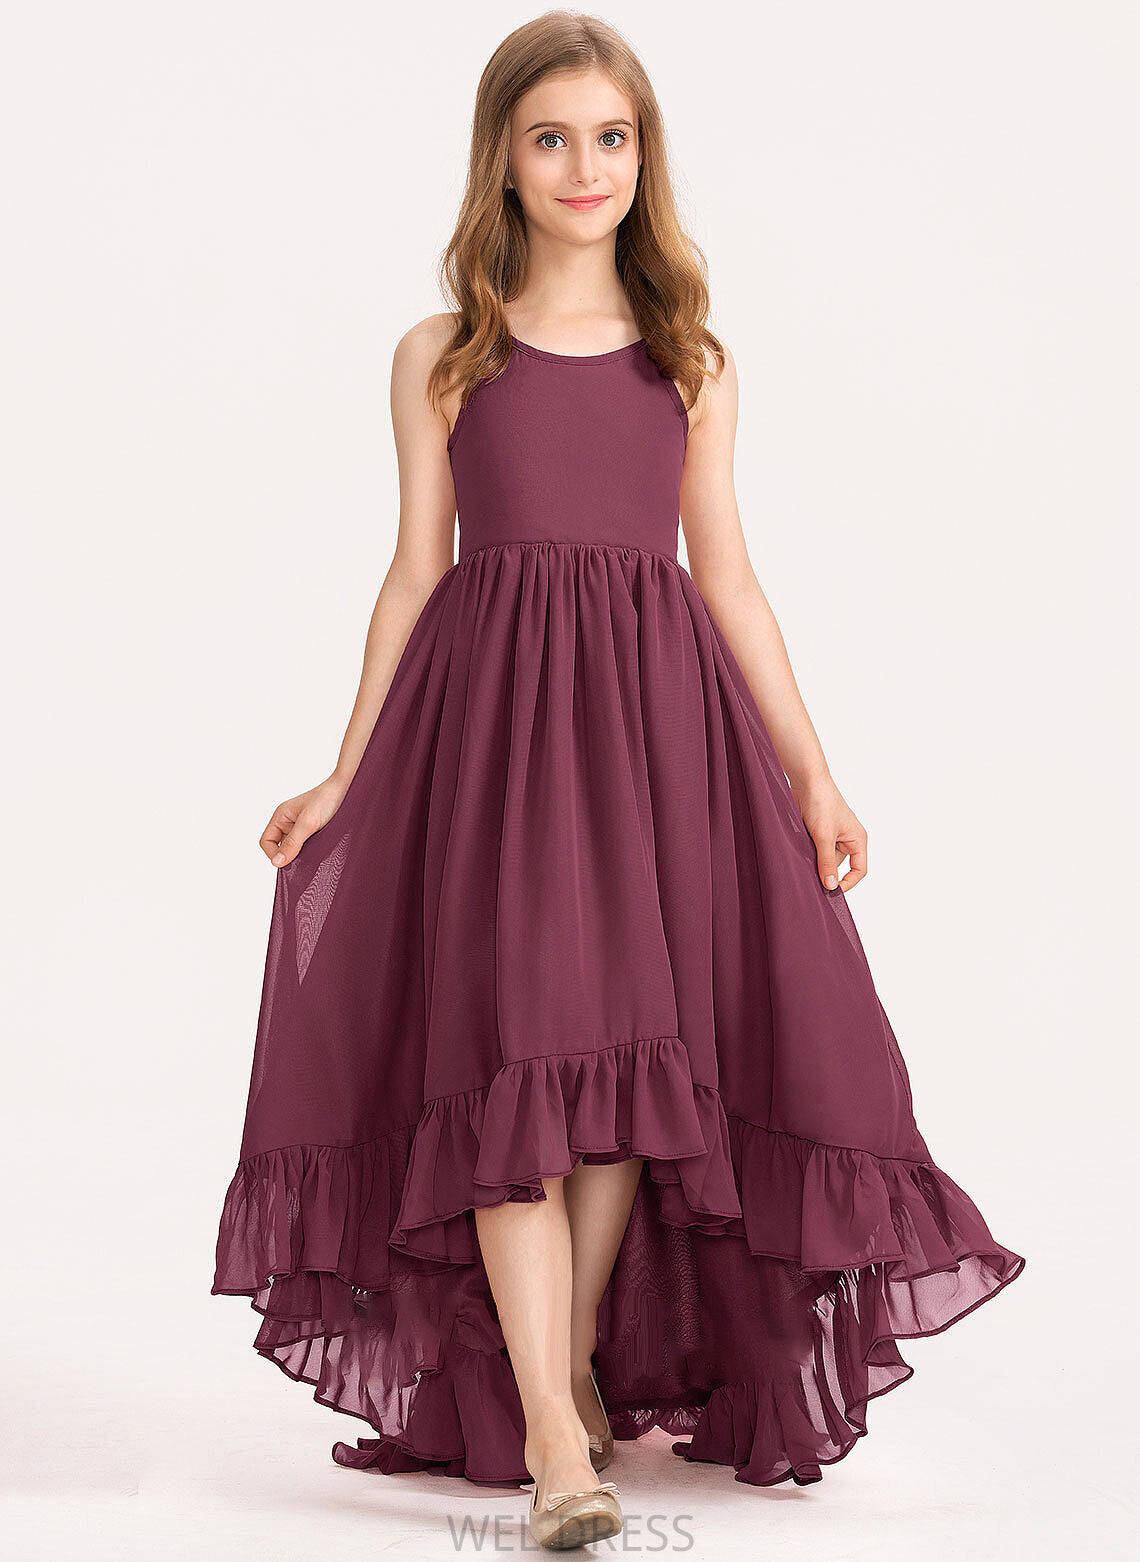 With A-Line Cascading Victoria Neck Junior Bridesmaid Dresses Chiffon Ruffles Scoop Asymmetrical Bow(s)